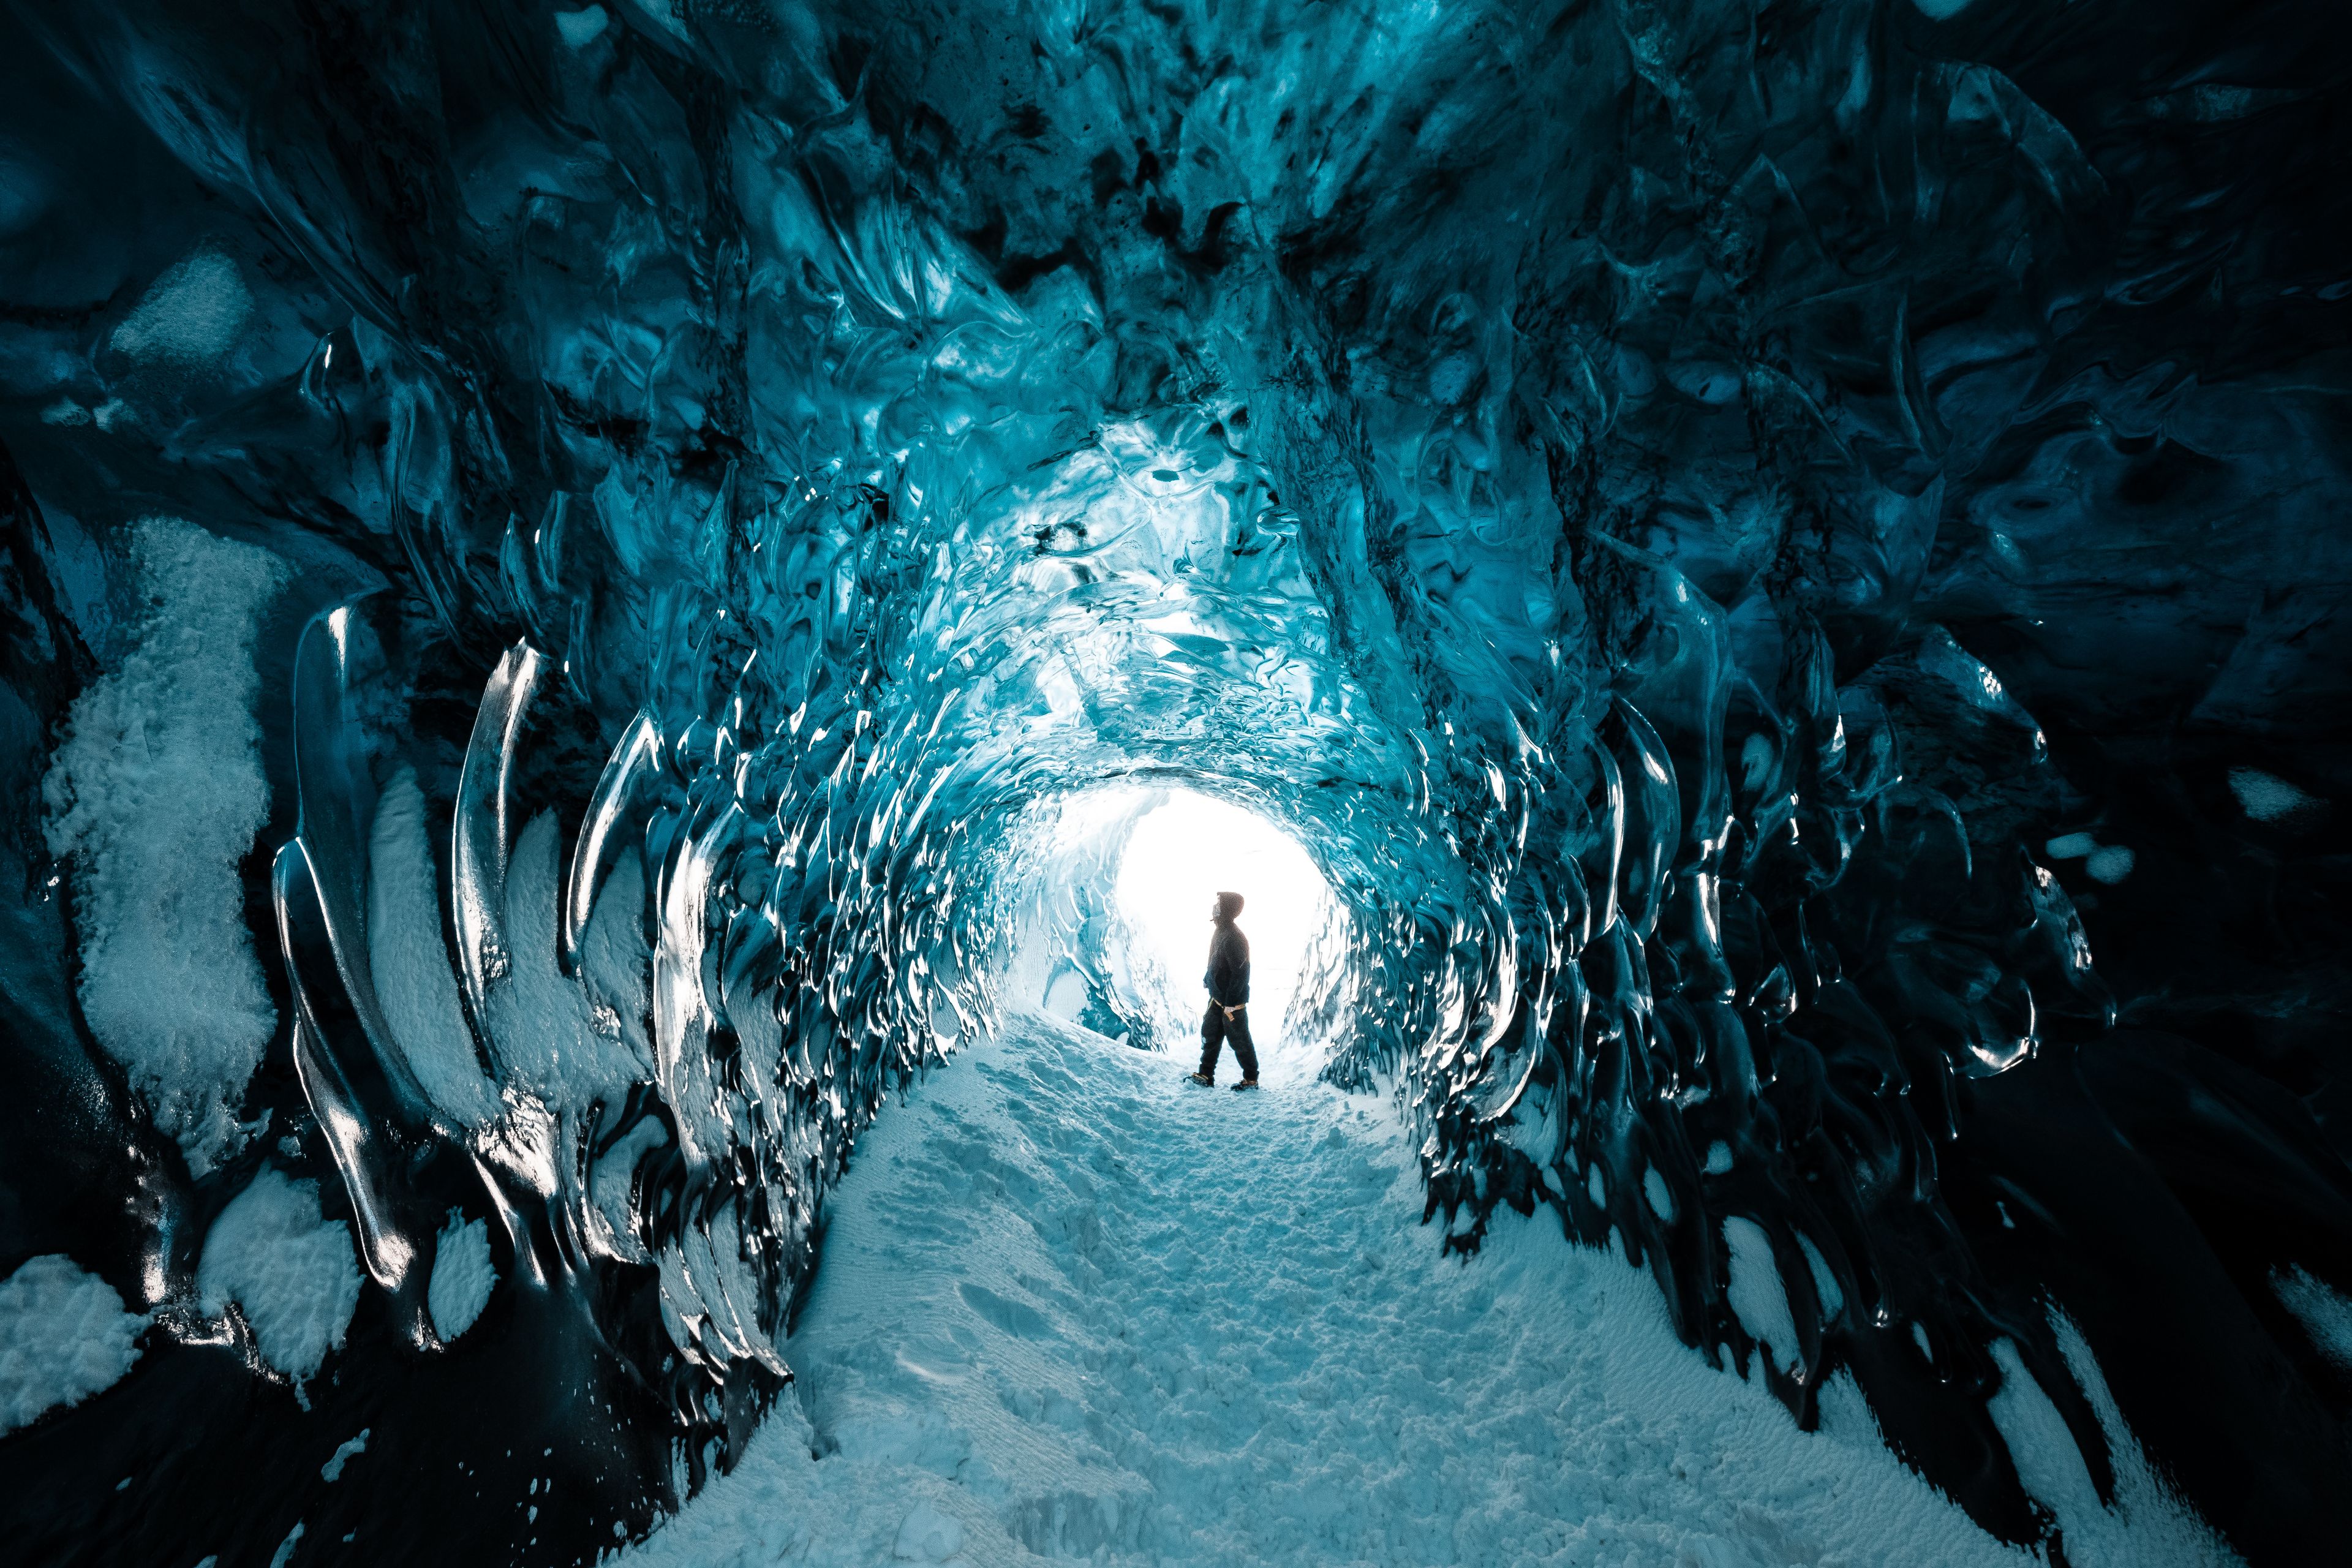 A view of an ice cave with blue light inside